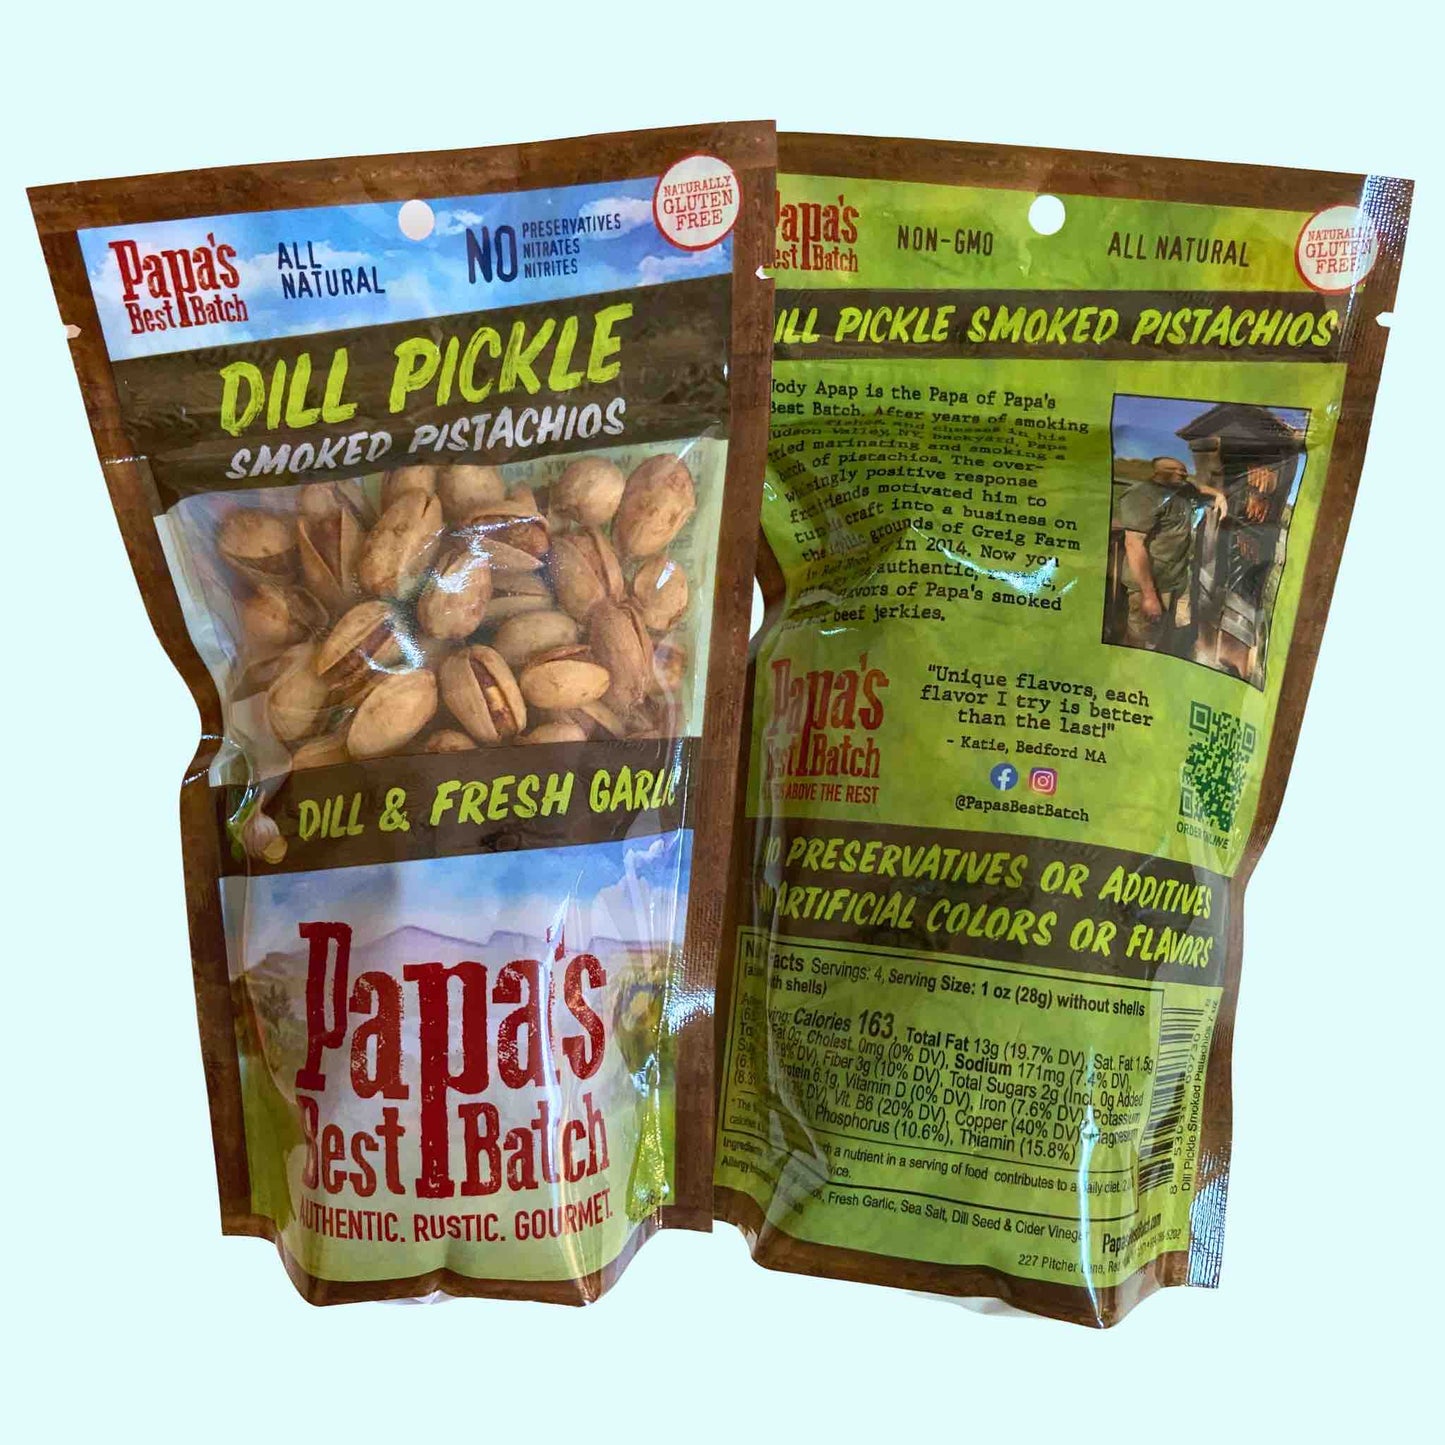 Dill Pickle Smoked Pistachios